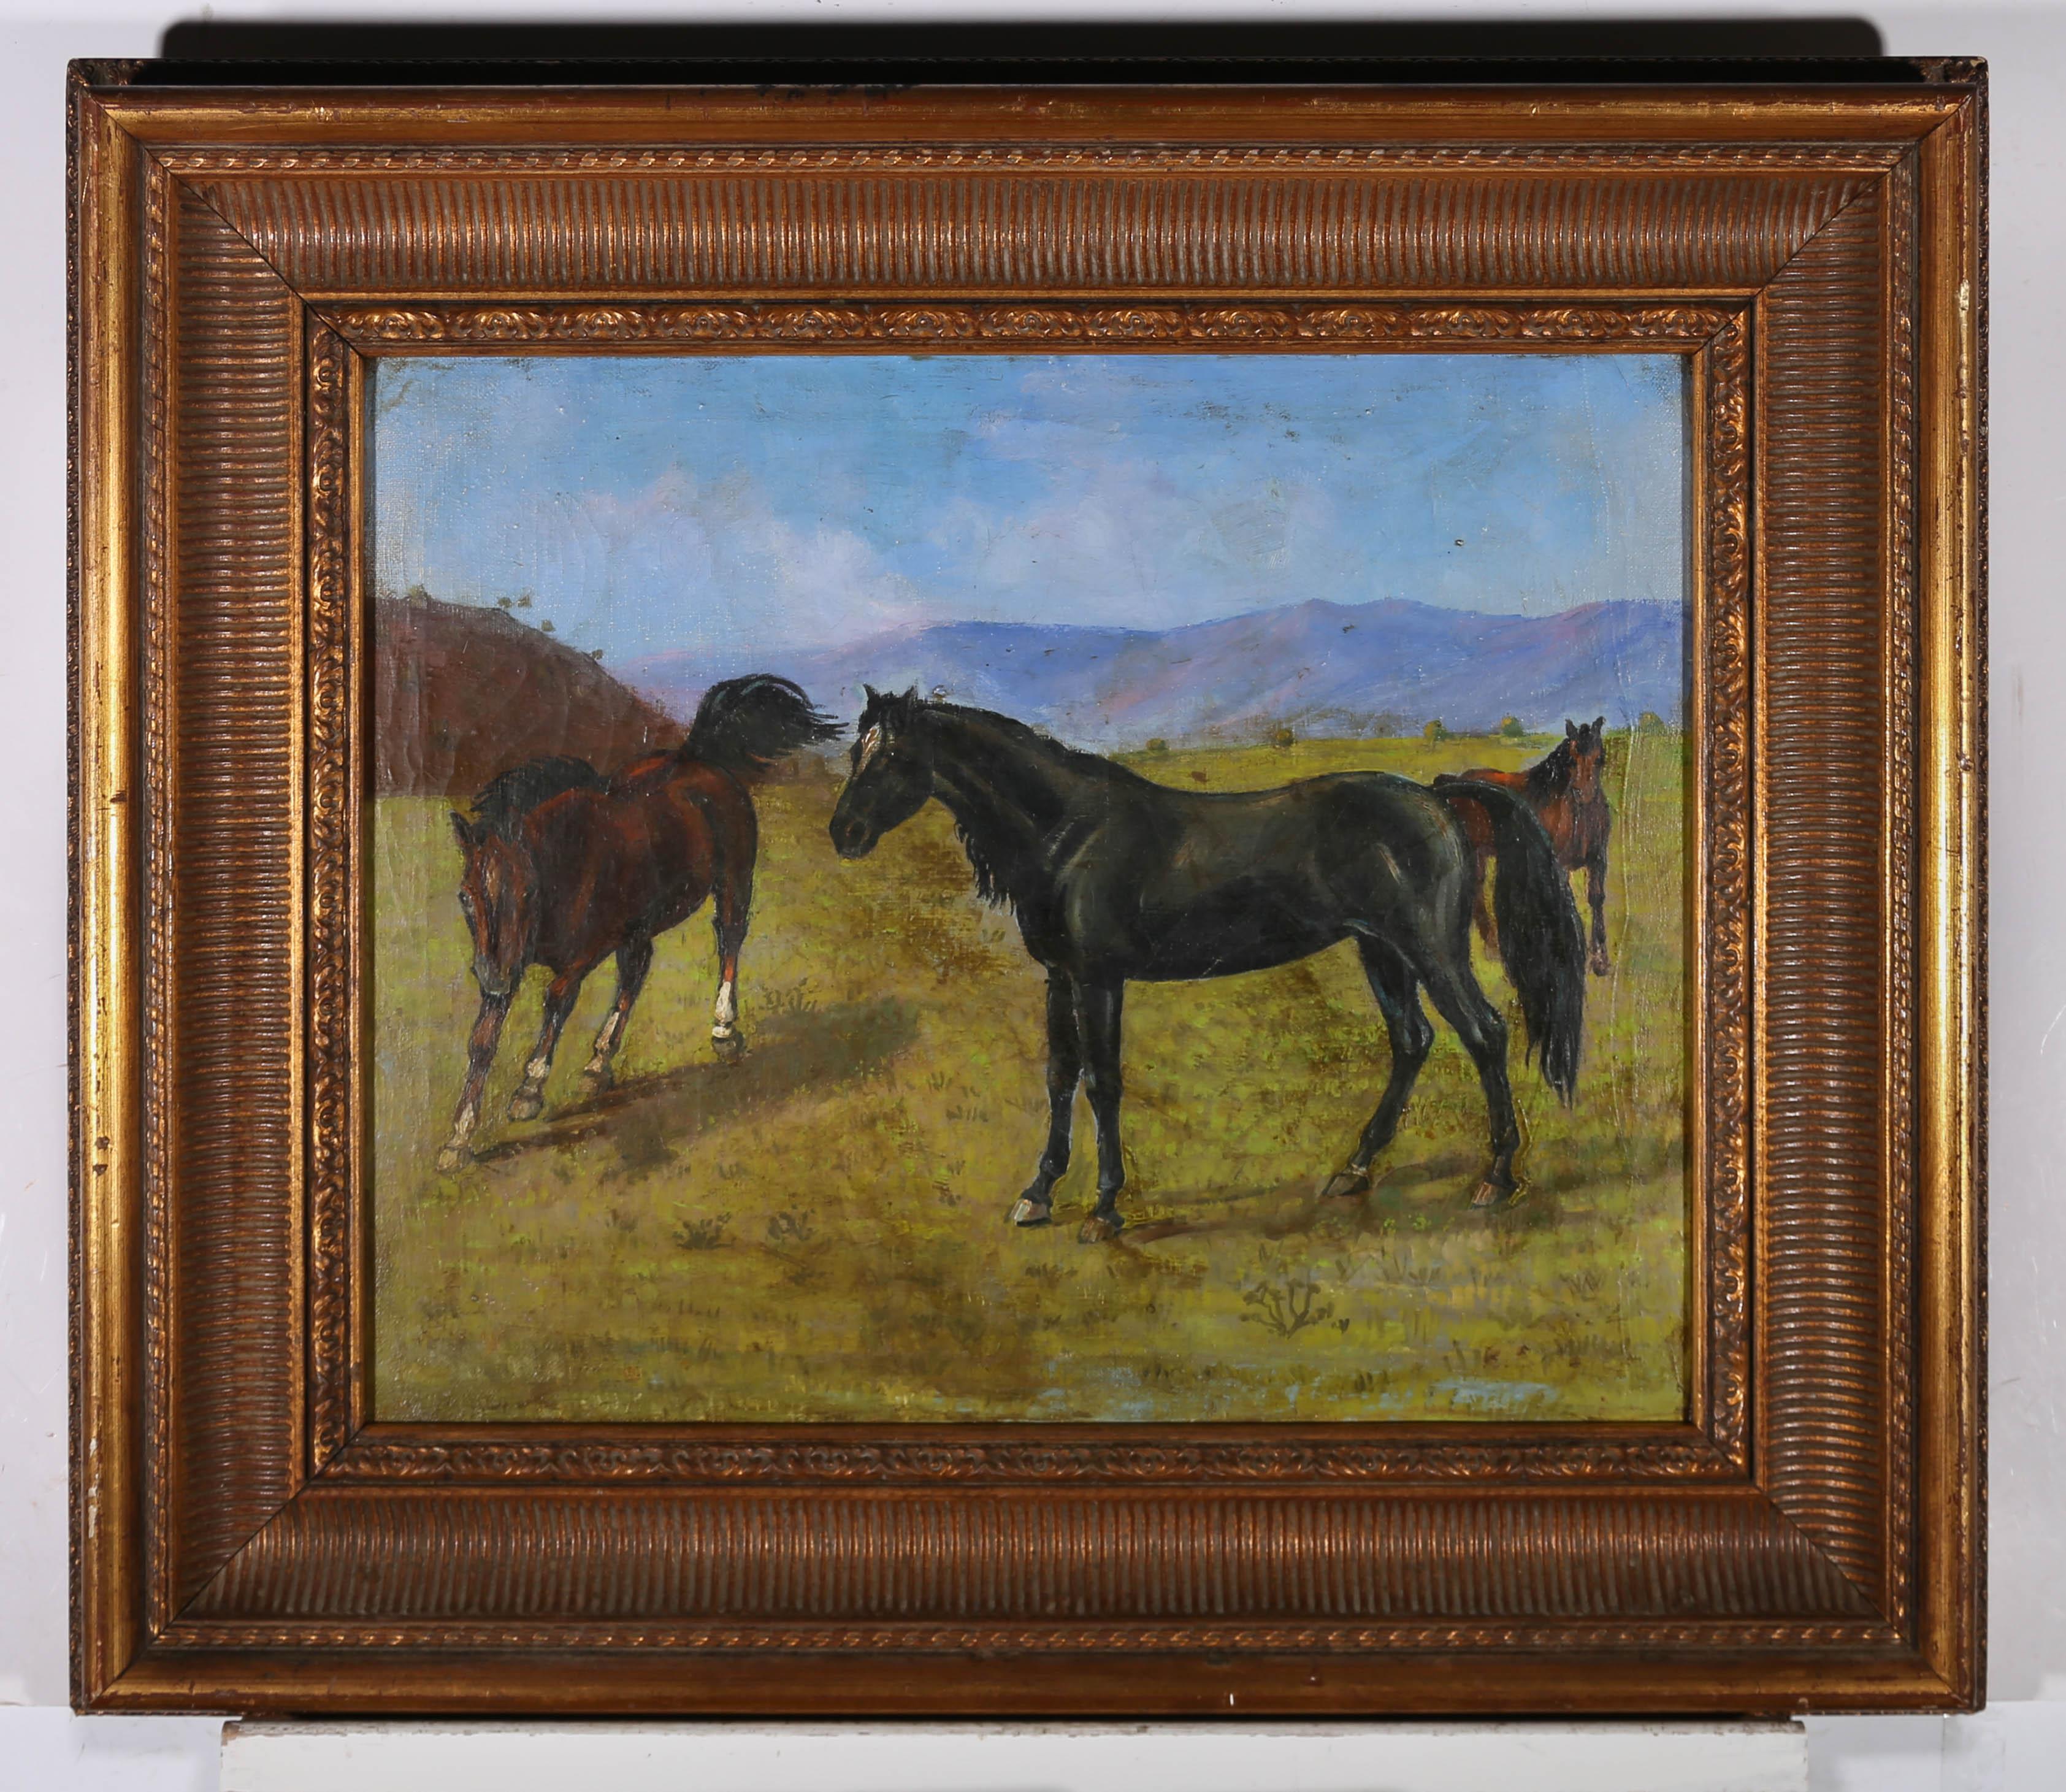 This delightful study depicts three well-groomed bay hoses in a moorland landscape. Painted in a charmingly naïve style with bold brushwork. Unsigned. Well presented in a fluted gilt frame with roped and foliate detail. On canvas on stretchers.
